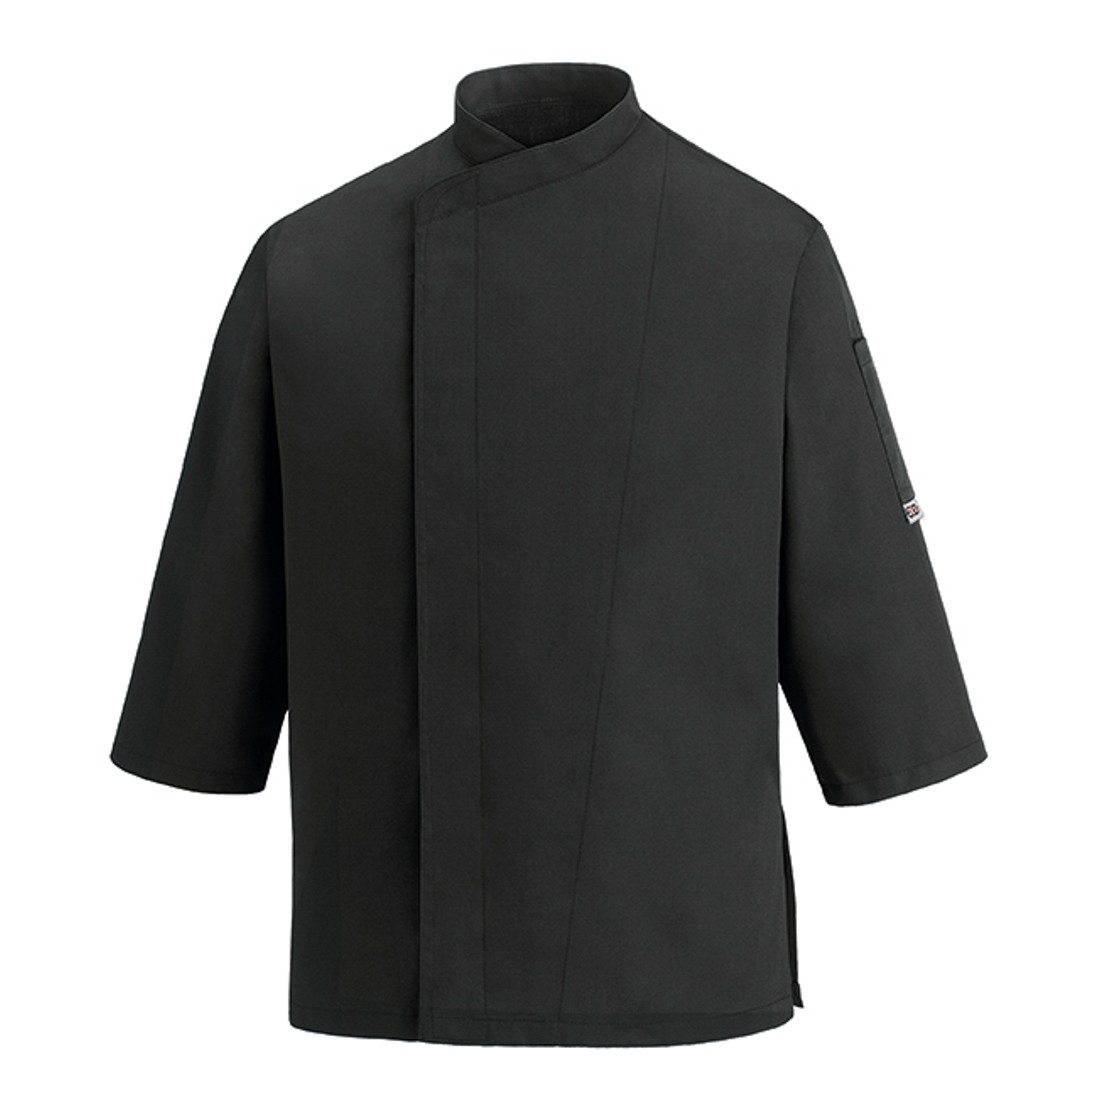 Chef's Jacket, 3/4 Sleeves, 65% polyester/35% cotton - Safetywear